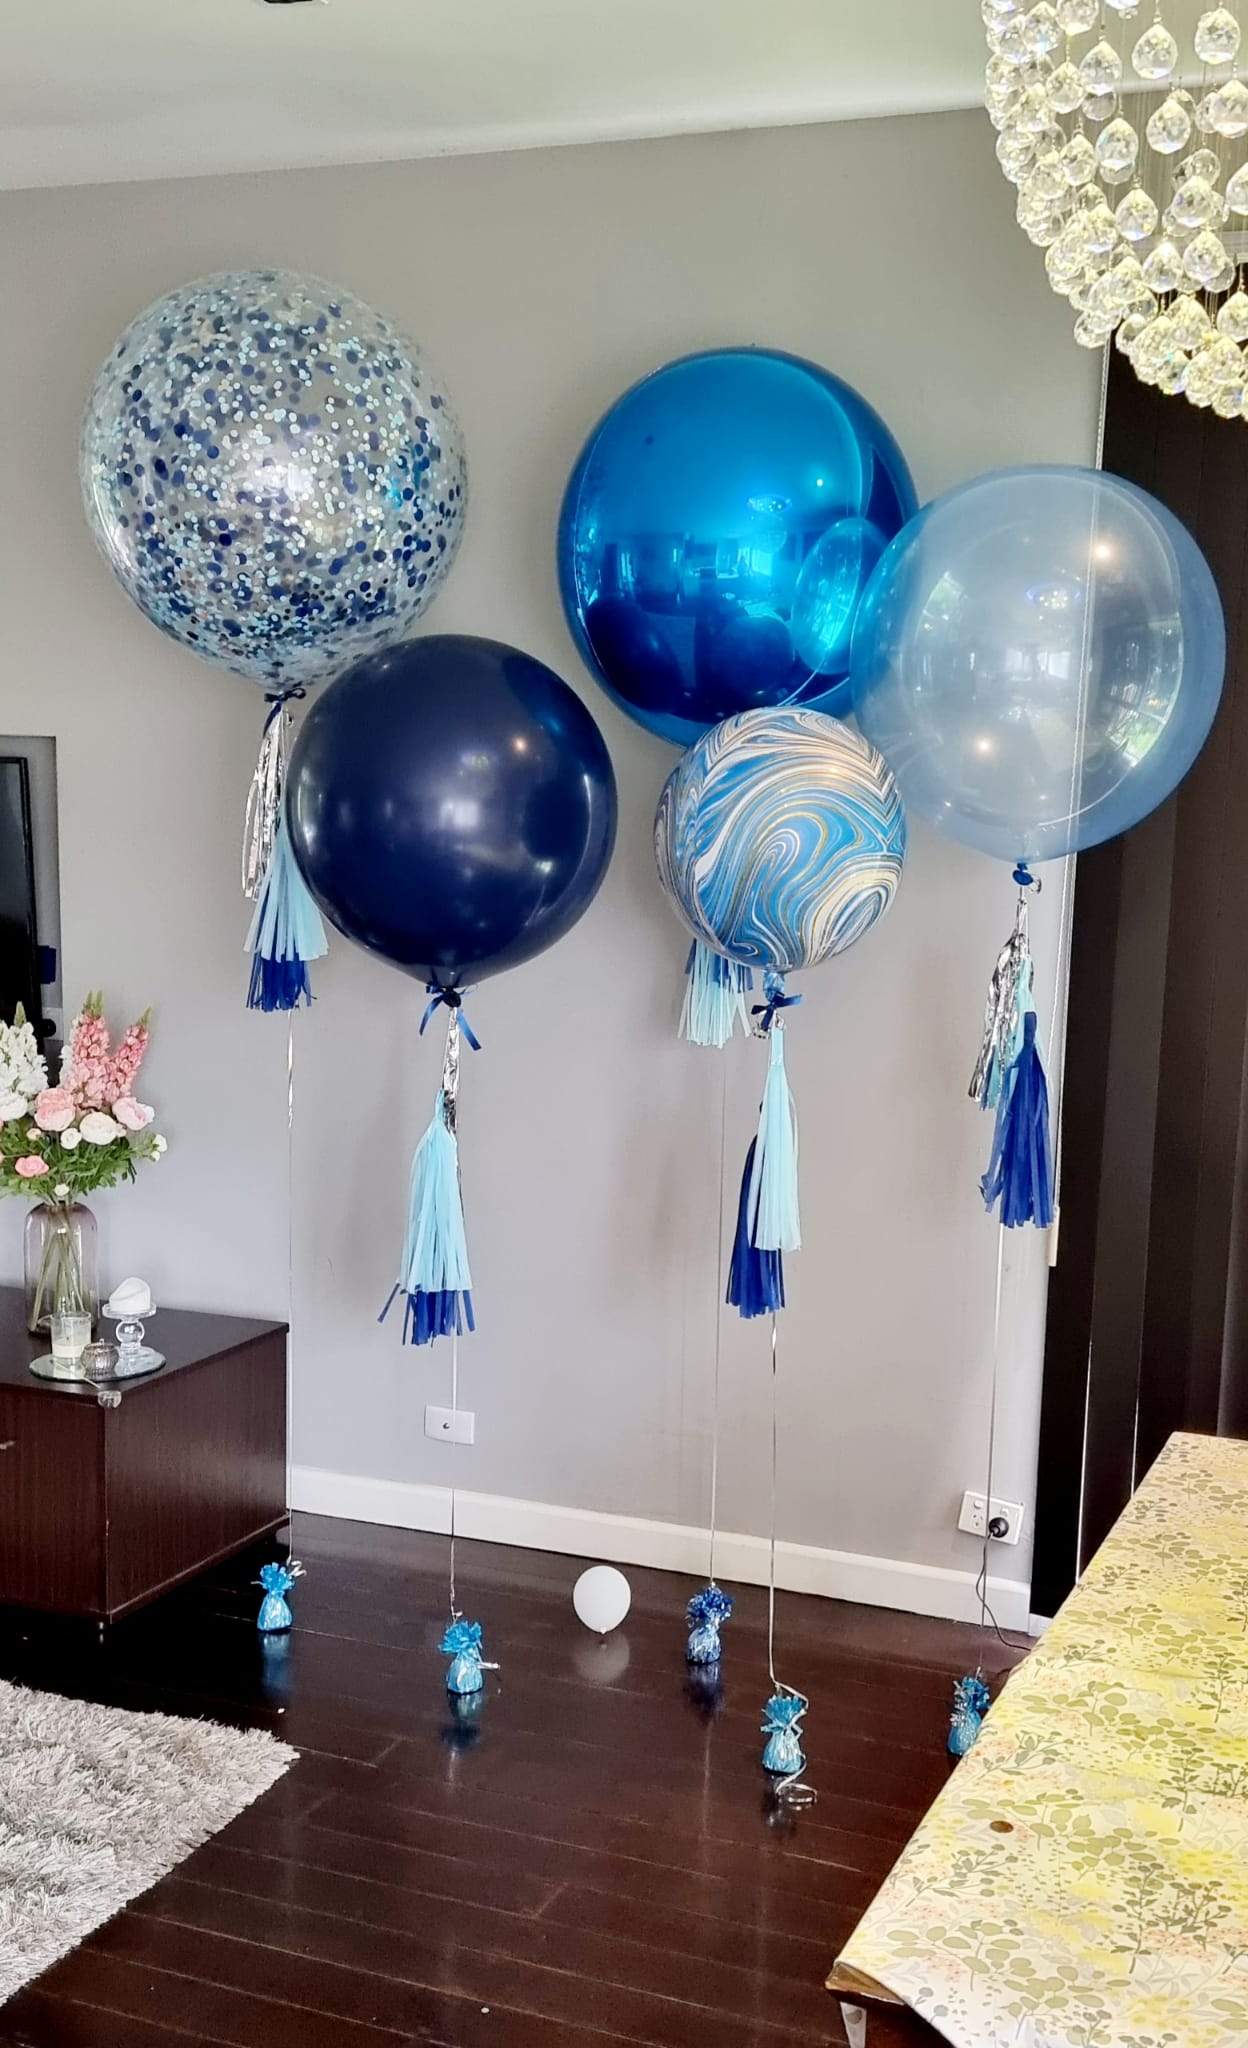 Premium Party Event Balloon Decorations Delivered Melbourne Blue Toned Orbs Confetti